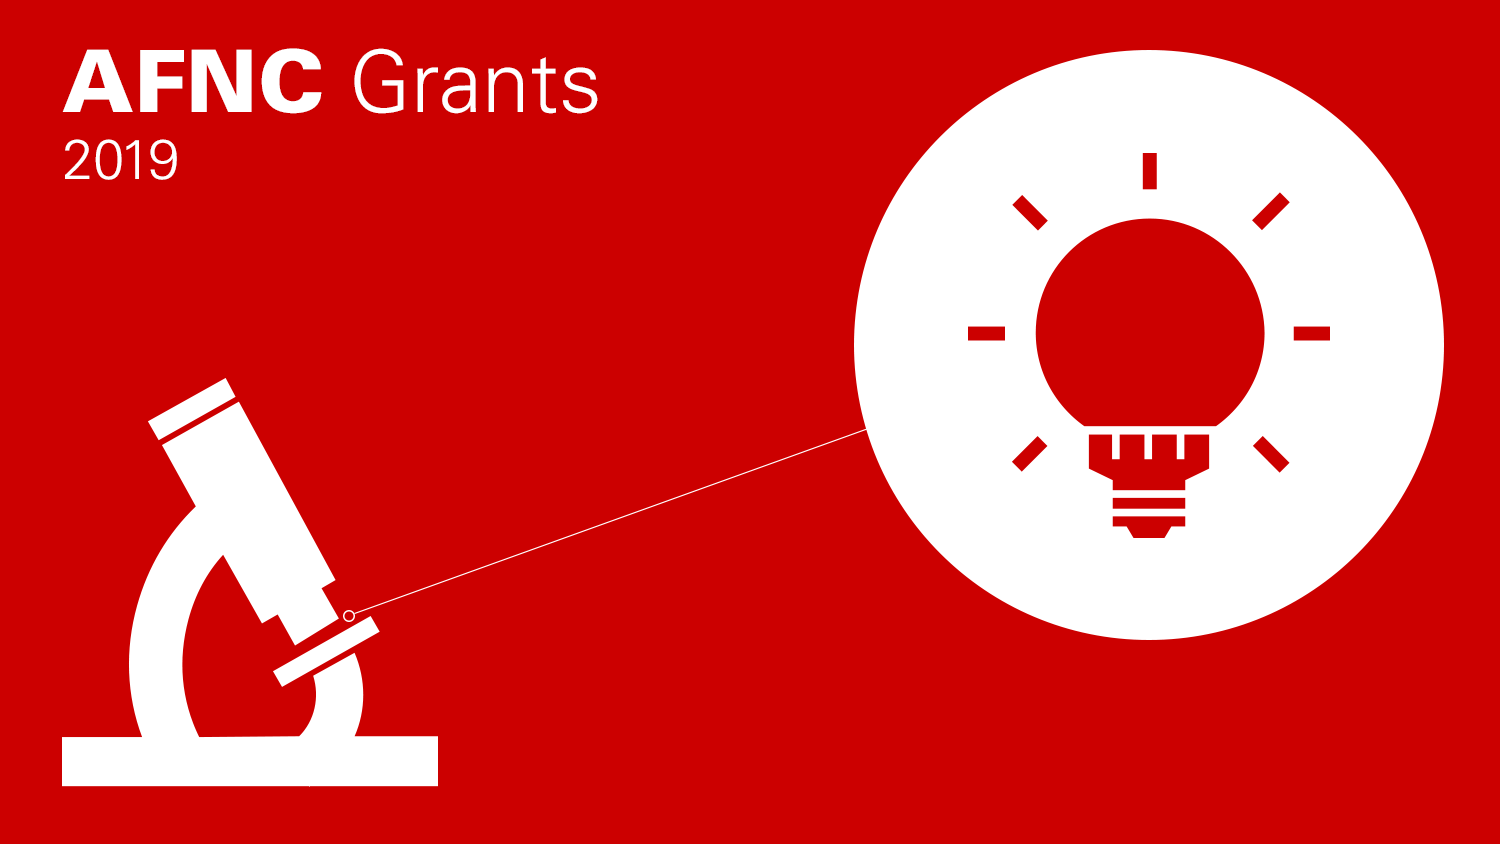 AFNC grants graphic with a microscope and lightbulb